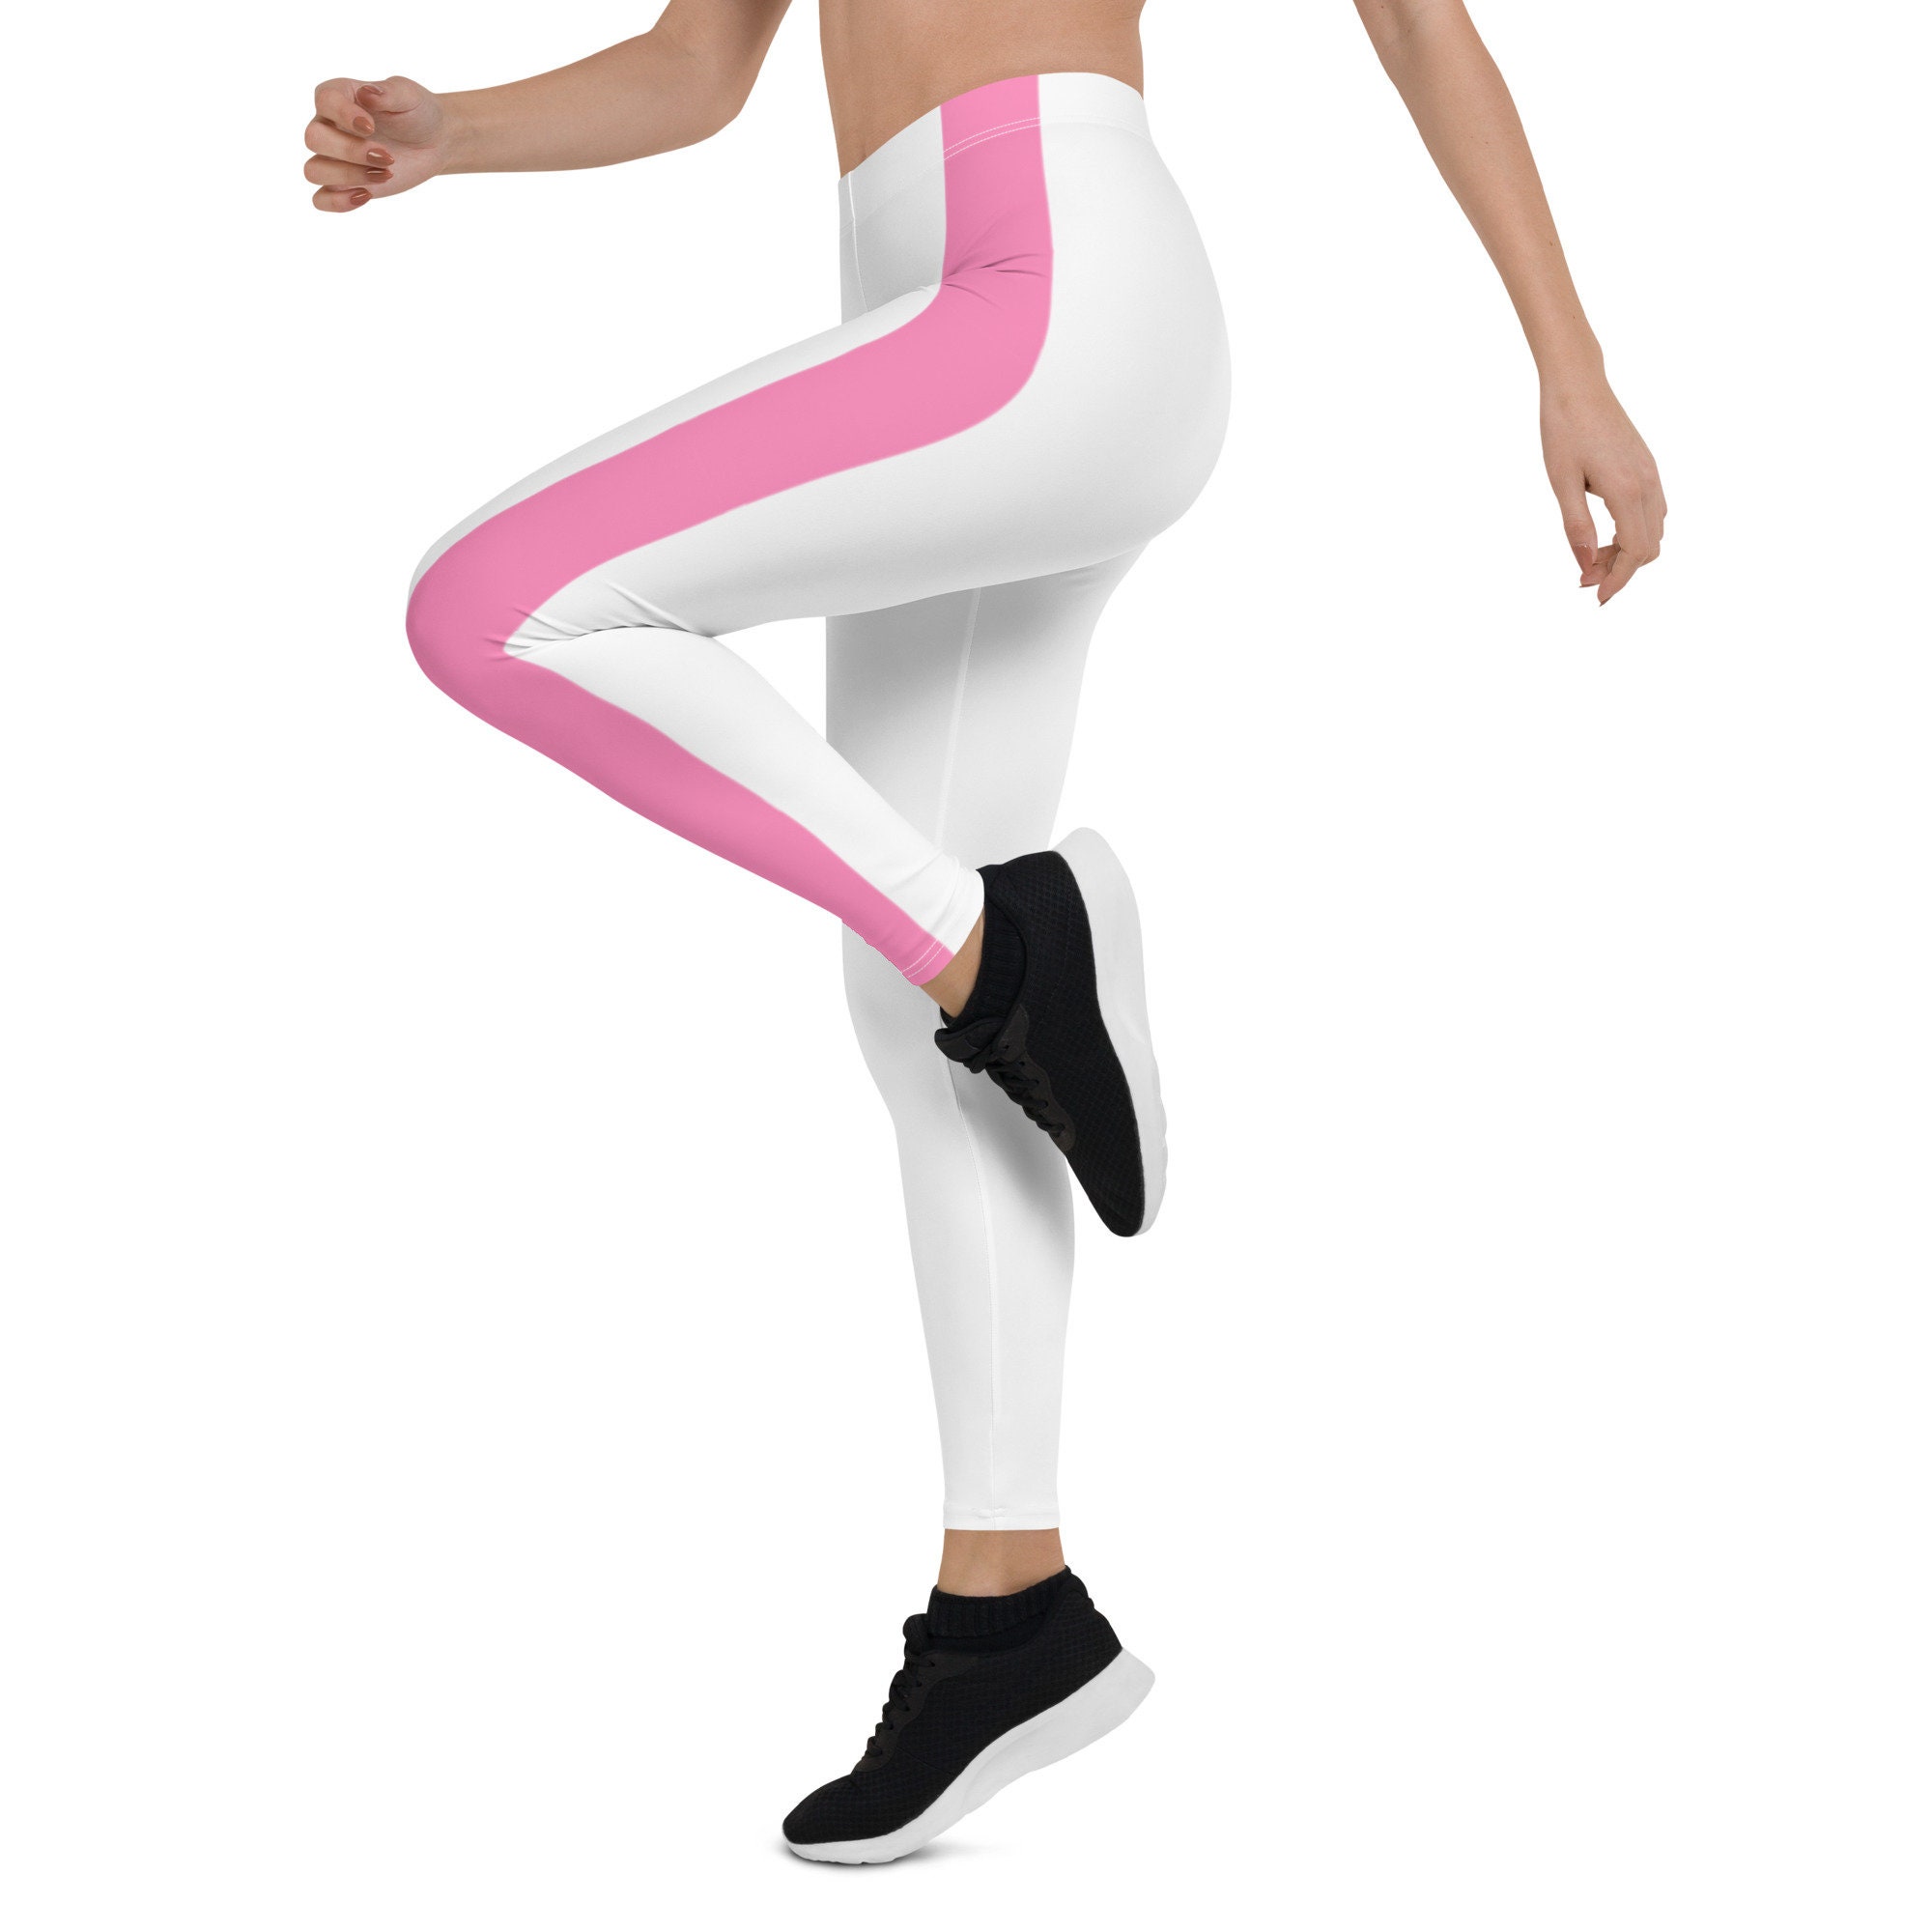 Princess Peach Leggings the Perfect Addition to Your Royal